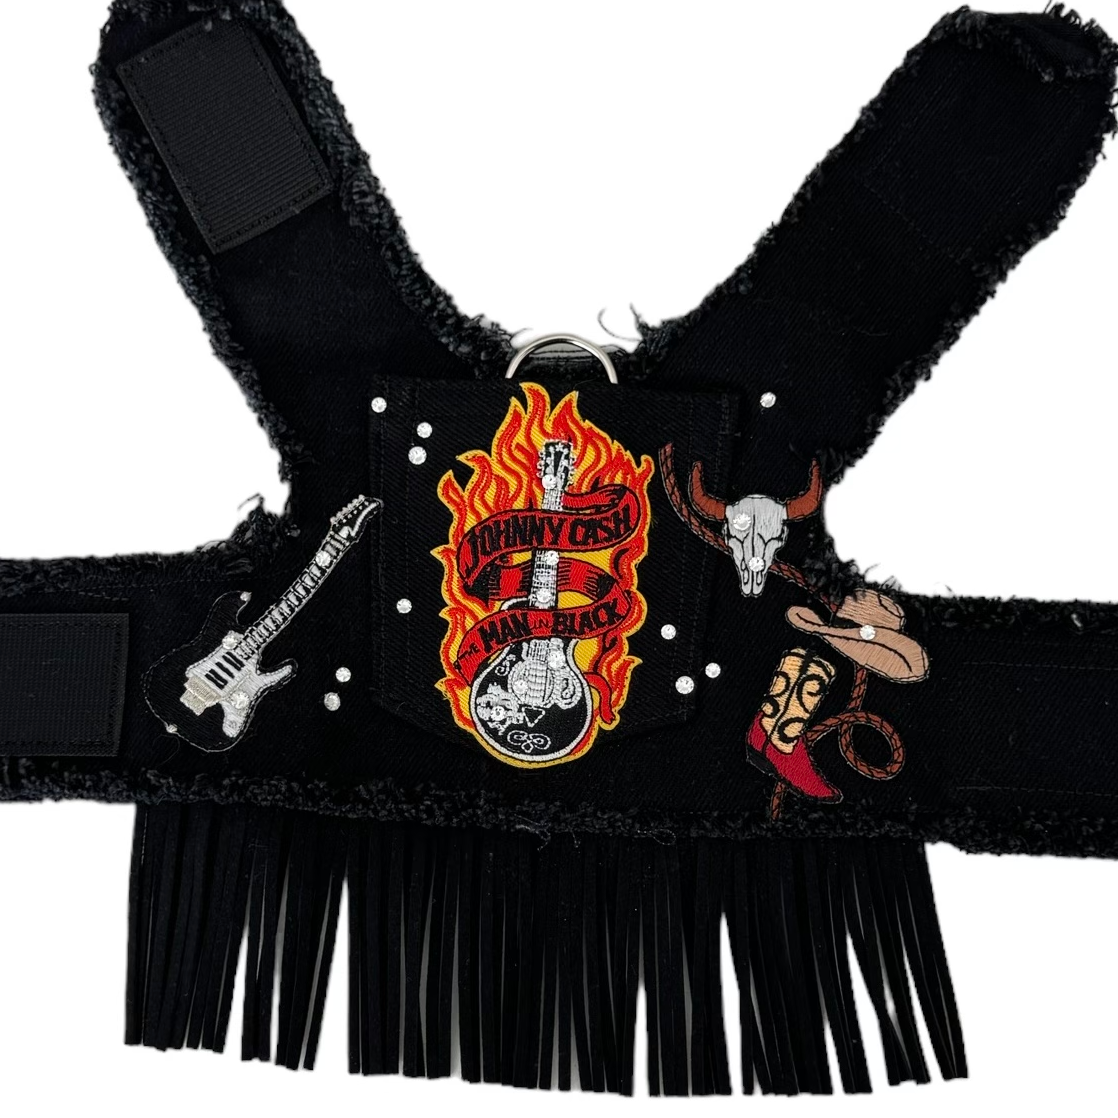 Deluxe Johnny Cash Harness